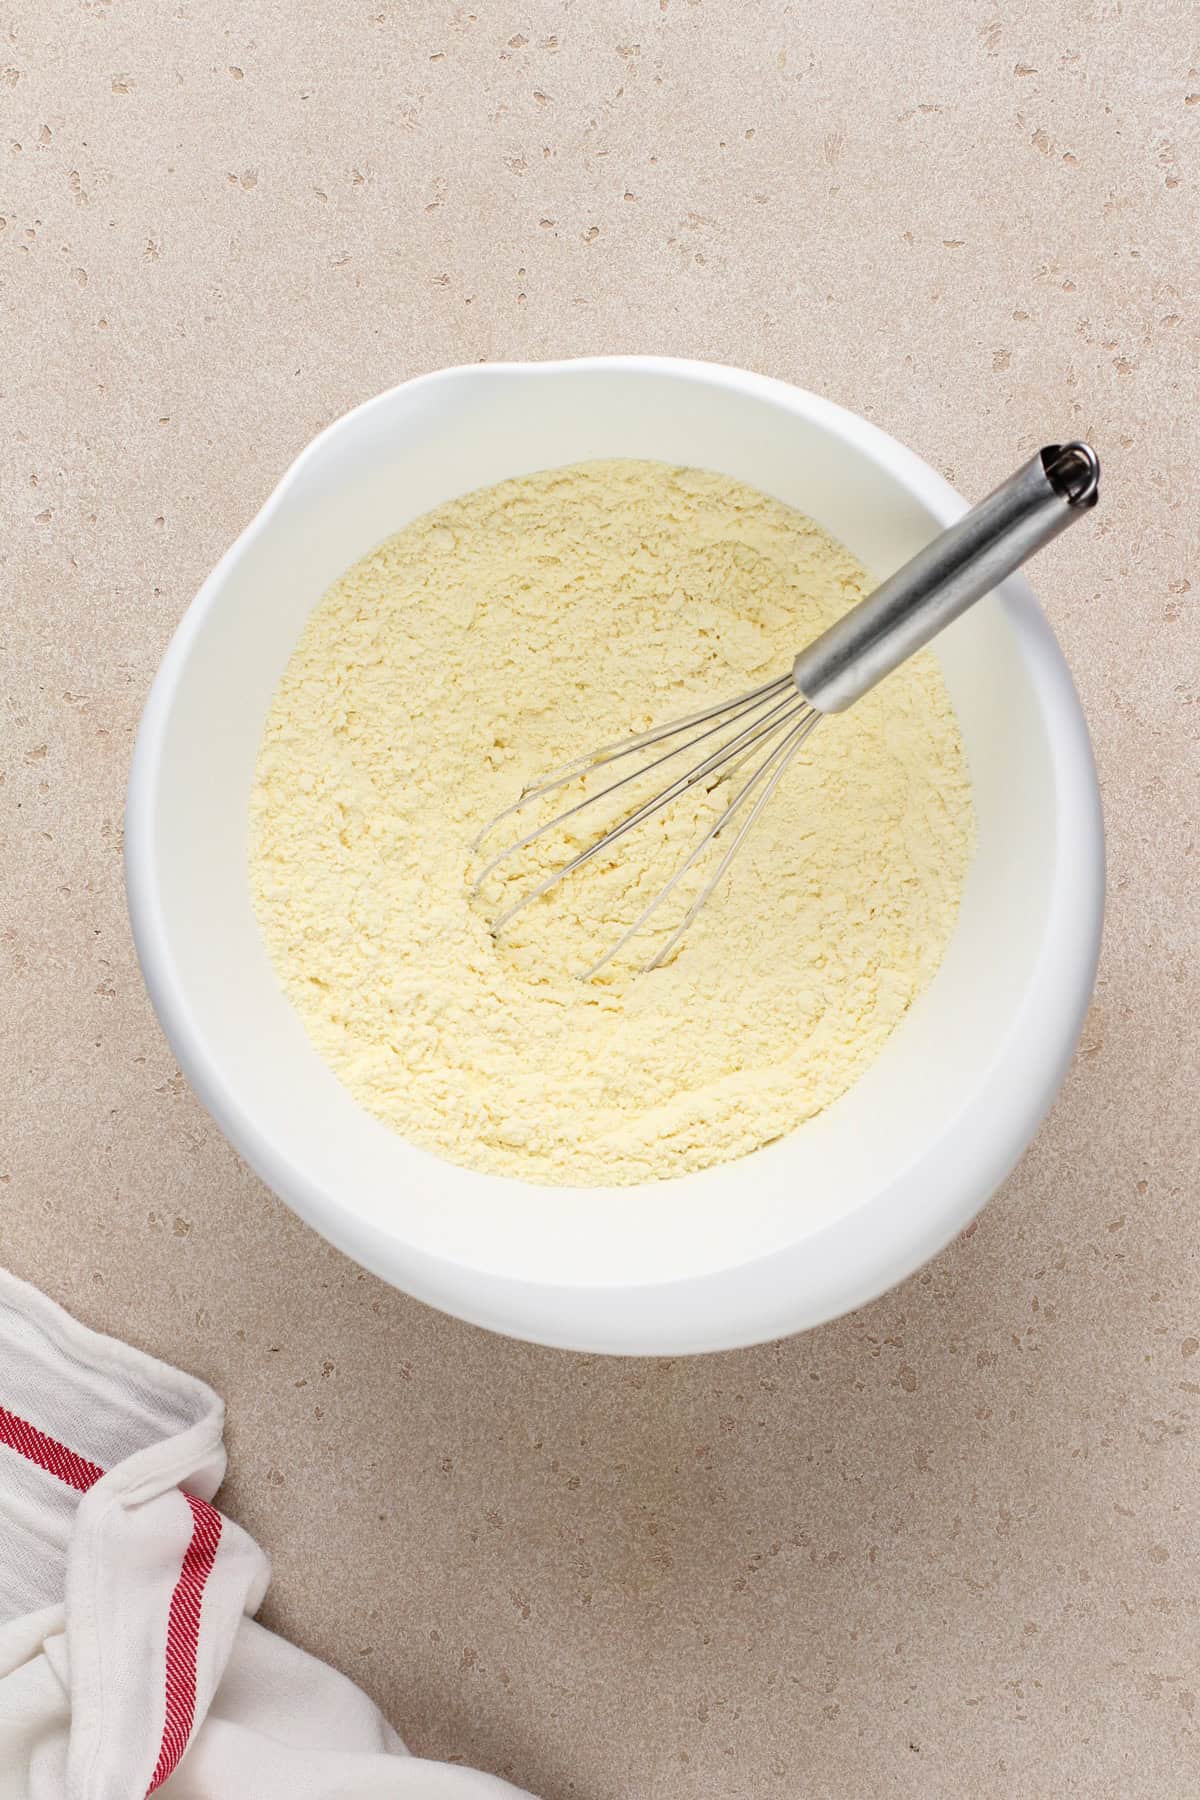 Yellow cake mix and pudding mix whisked together in a white bowl.